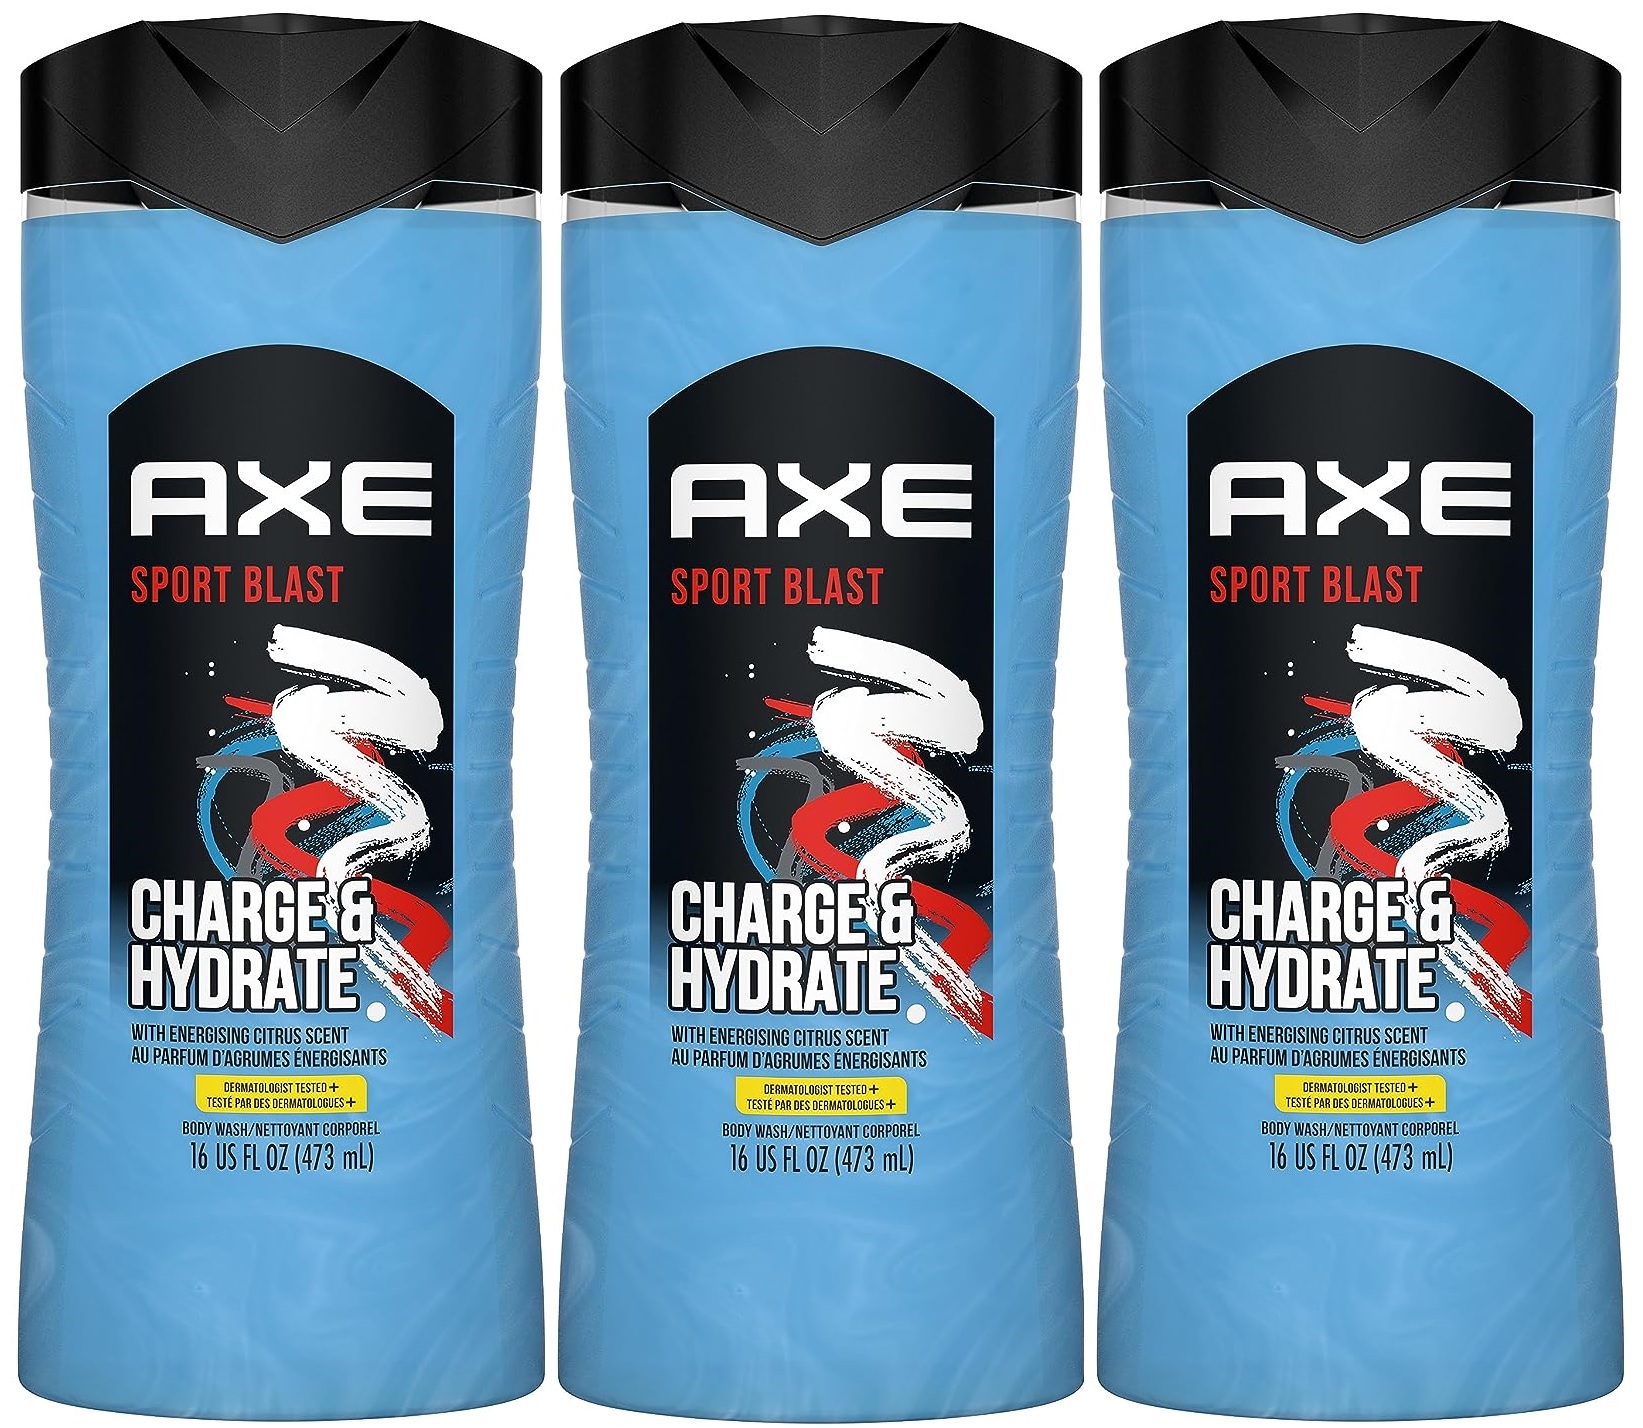 16-Oz AXE Charge & Hydrate Men's Body Wash (Energizing Citrus Scent) 3 for $9.20 ($3.07 each) w/ S&S + Free Shipping w/ Prime or on $35+